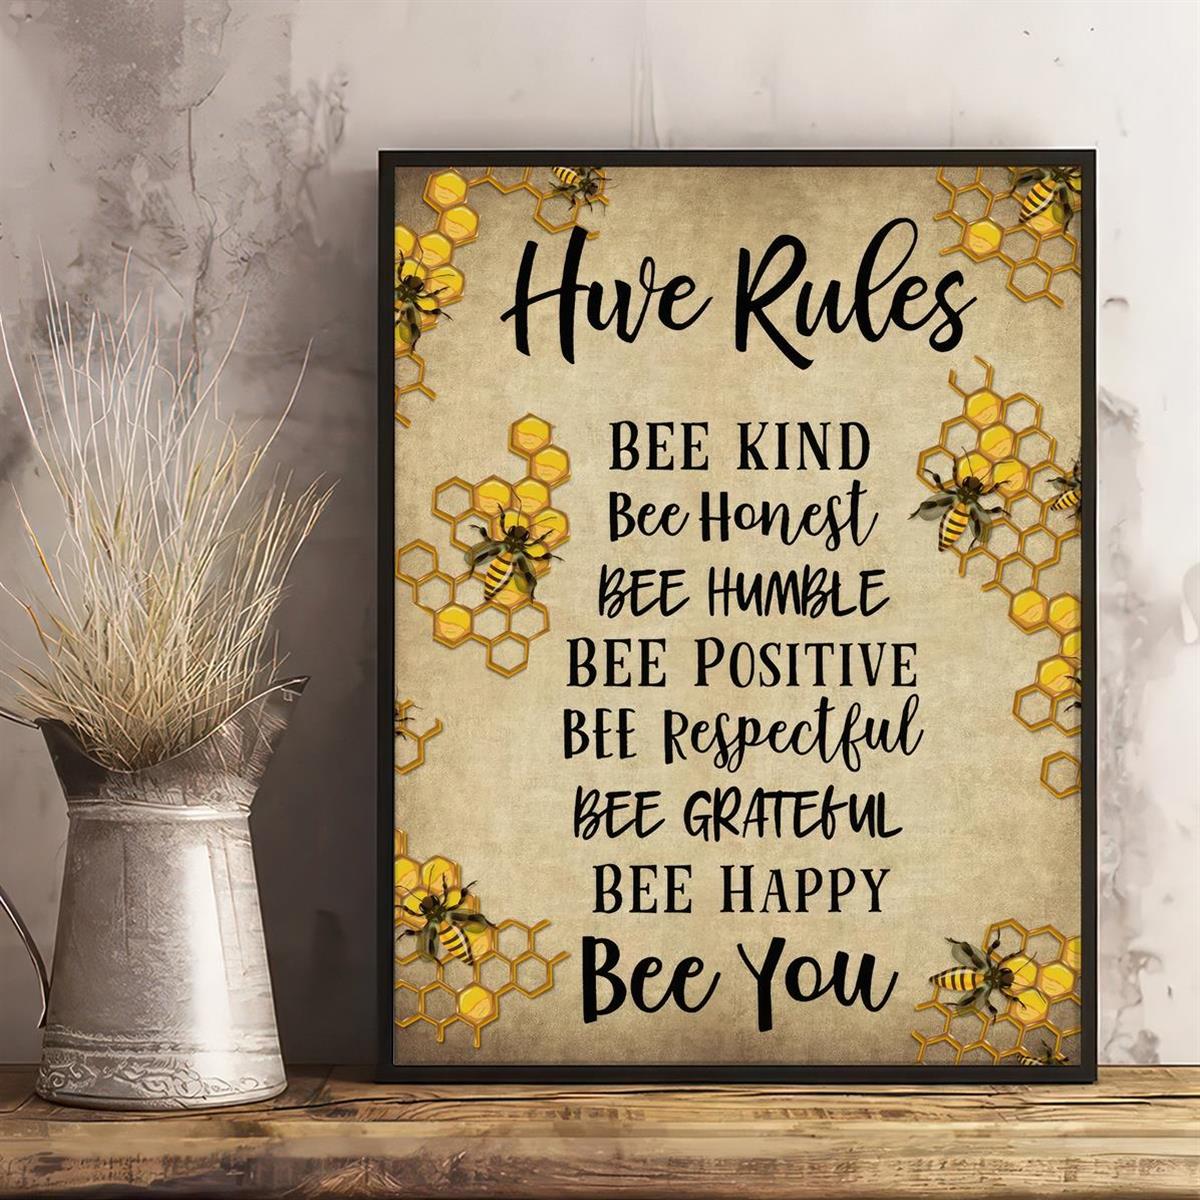 Mini Tiered Tray Picket Fence, Bumblebee Themed. Yellow, Black and White  Bee, Daisies. 6 Wide by 4 Tall Farmhouse Decor 